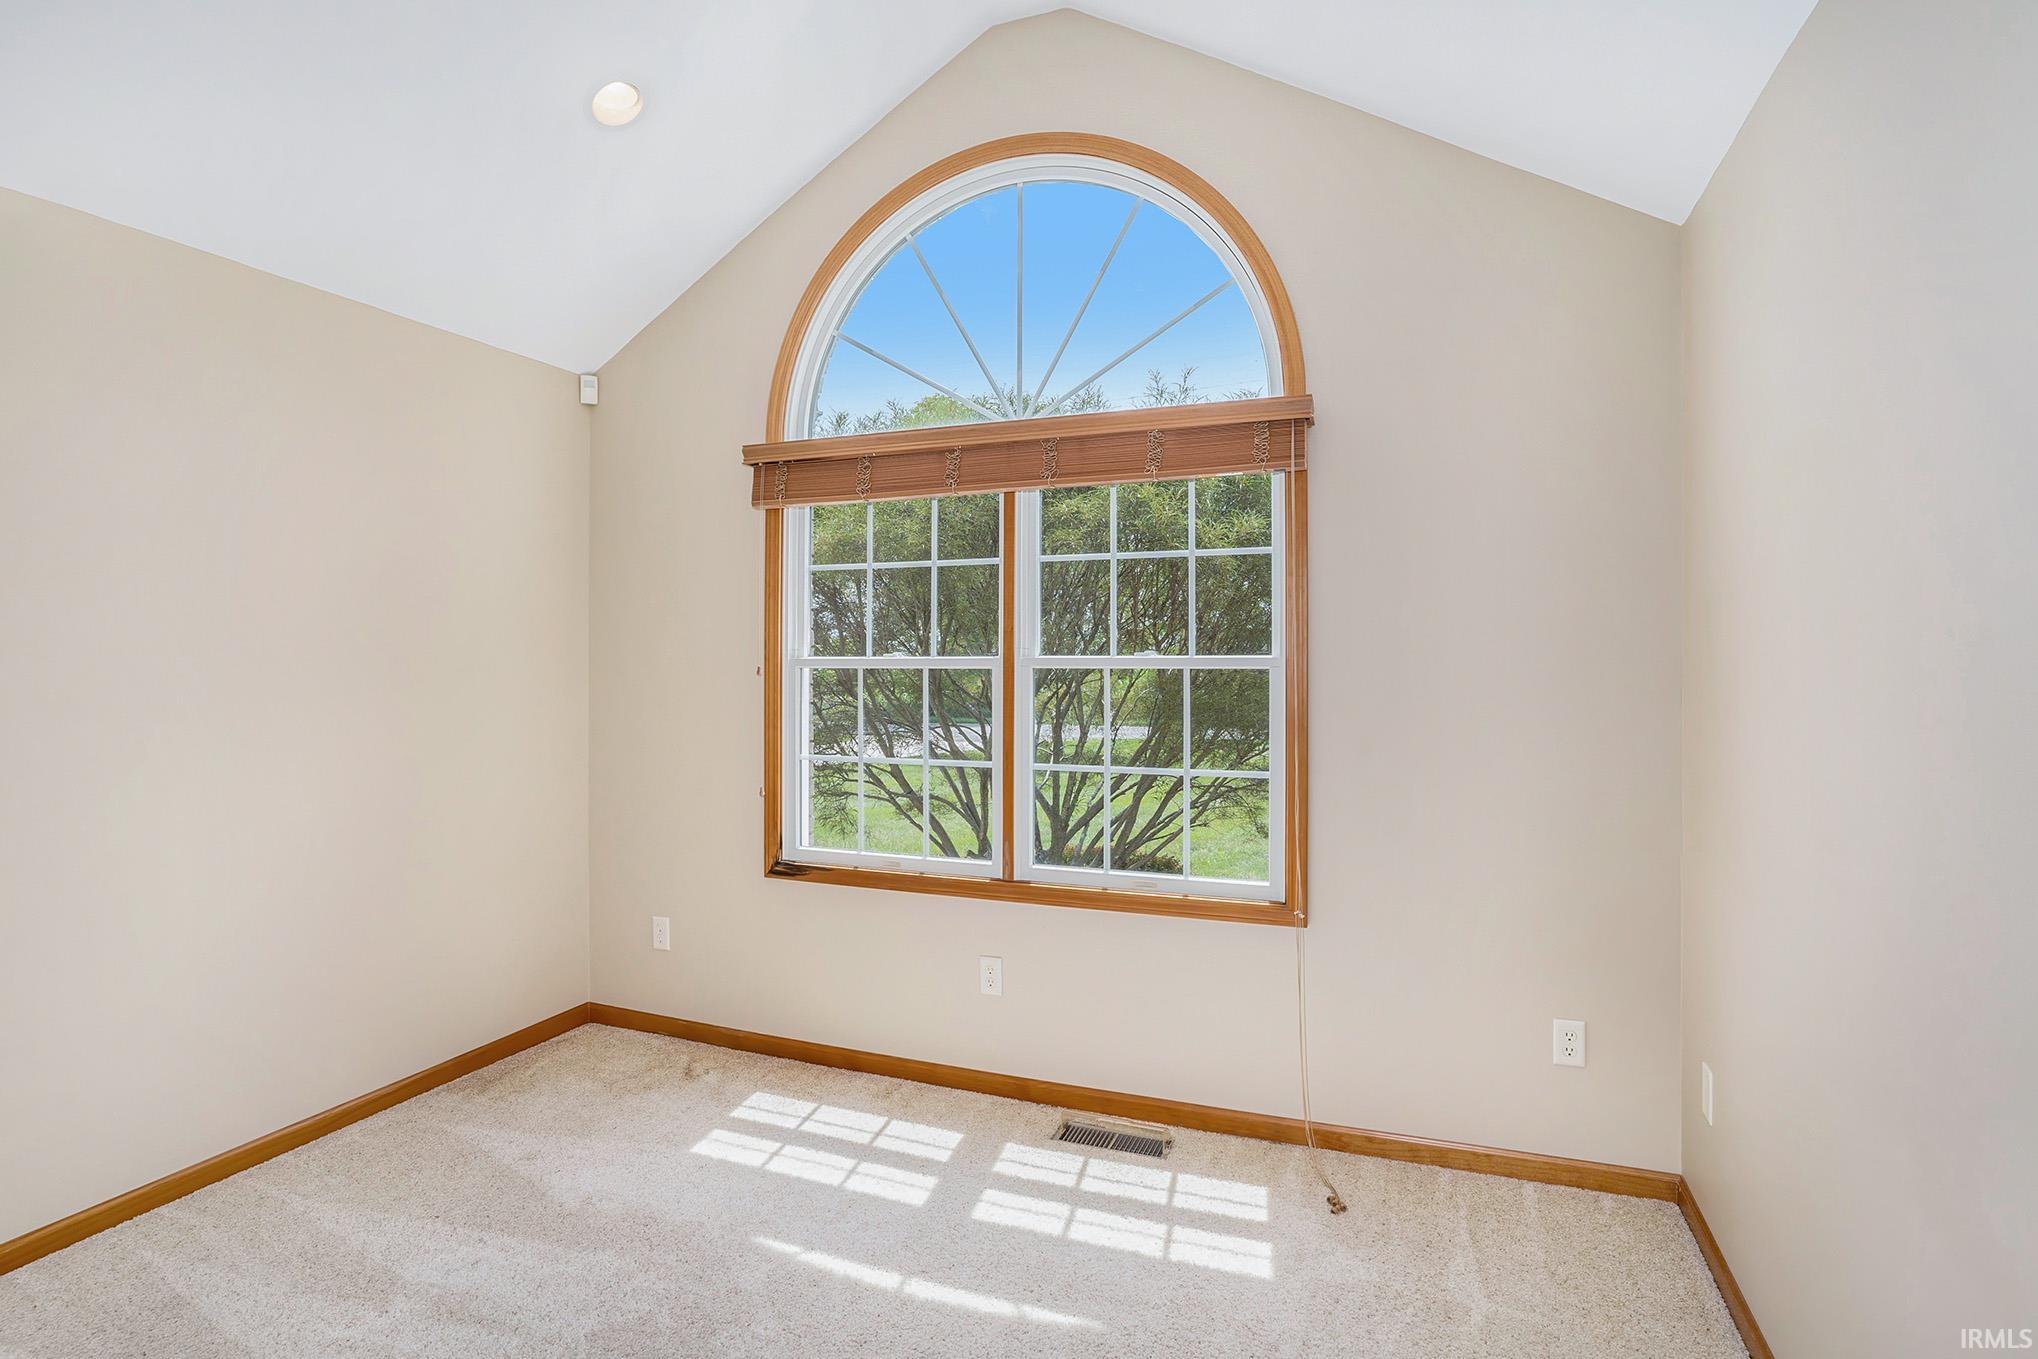 Cathedral Ceiling & Large Window Overlooking Front Yard